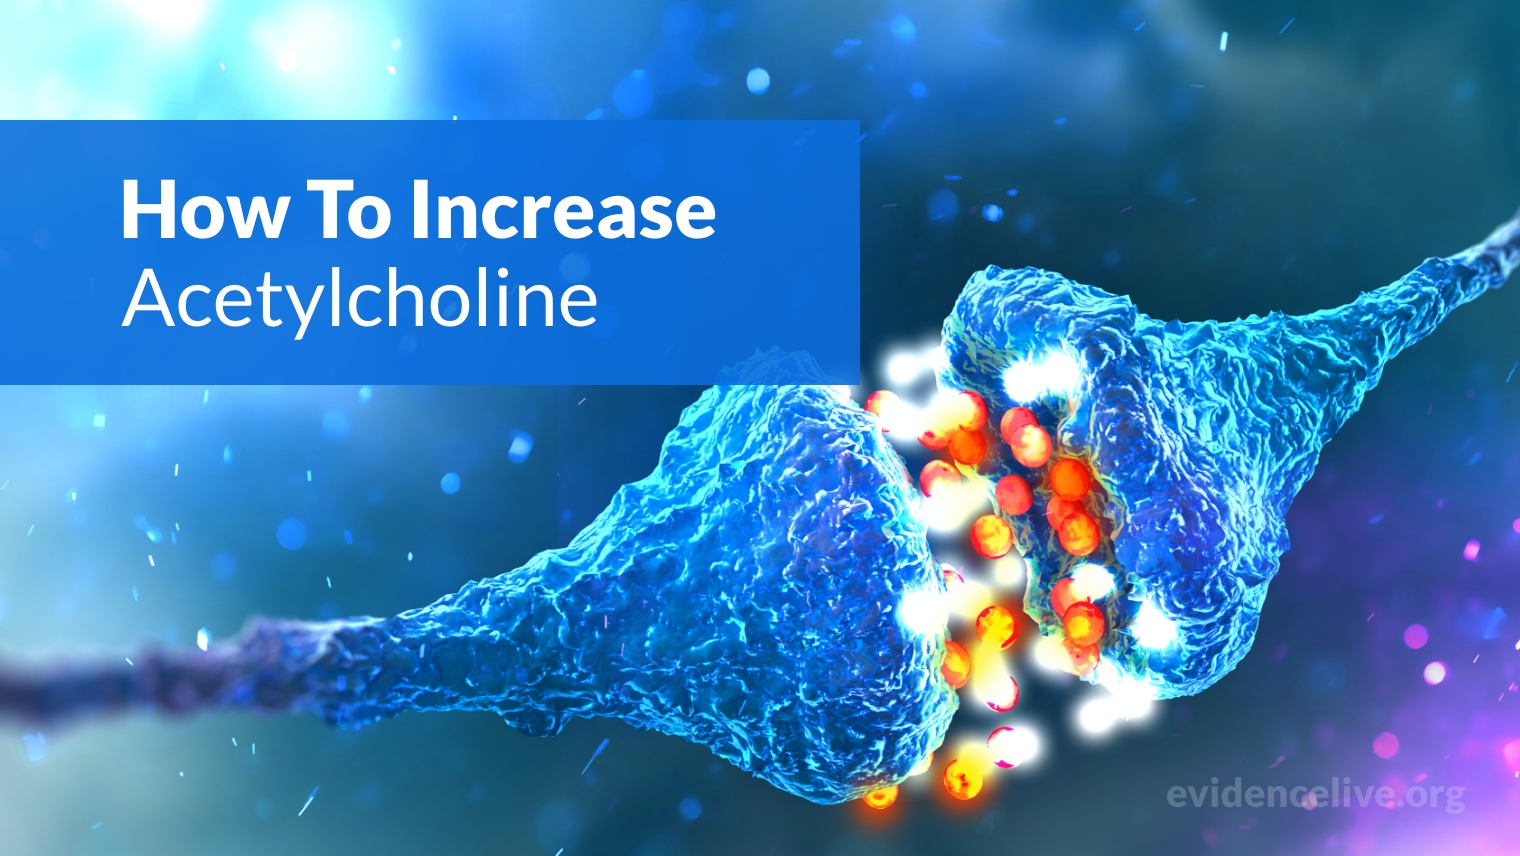 How To Increase Acetylcholine Levels Naturally